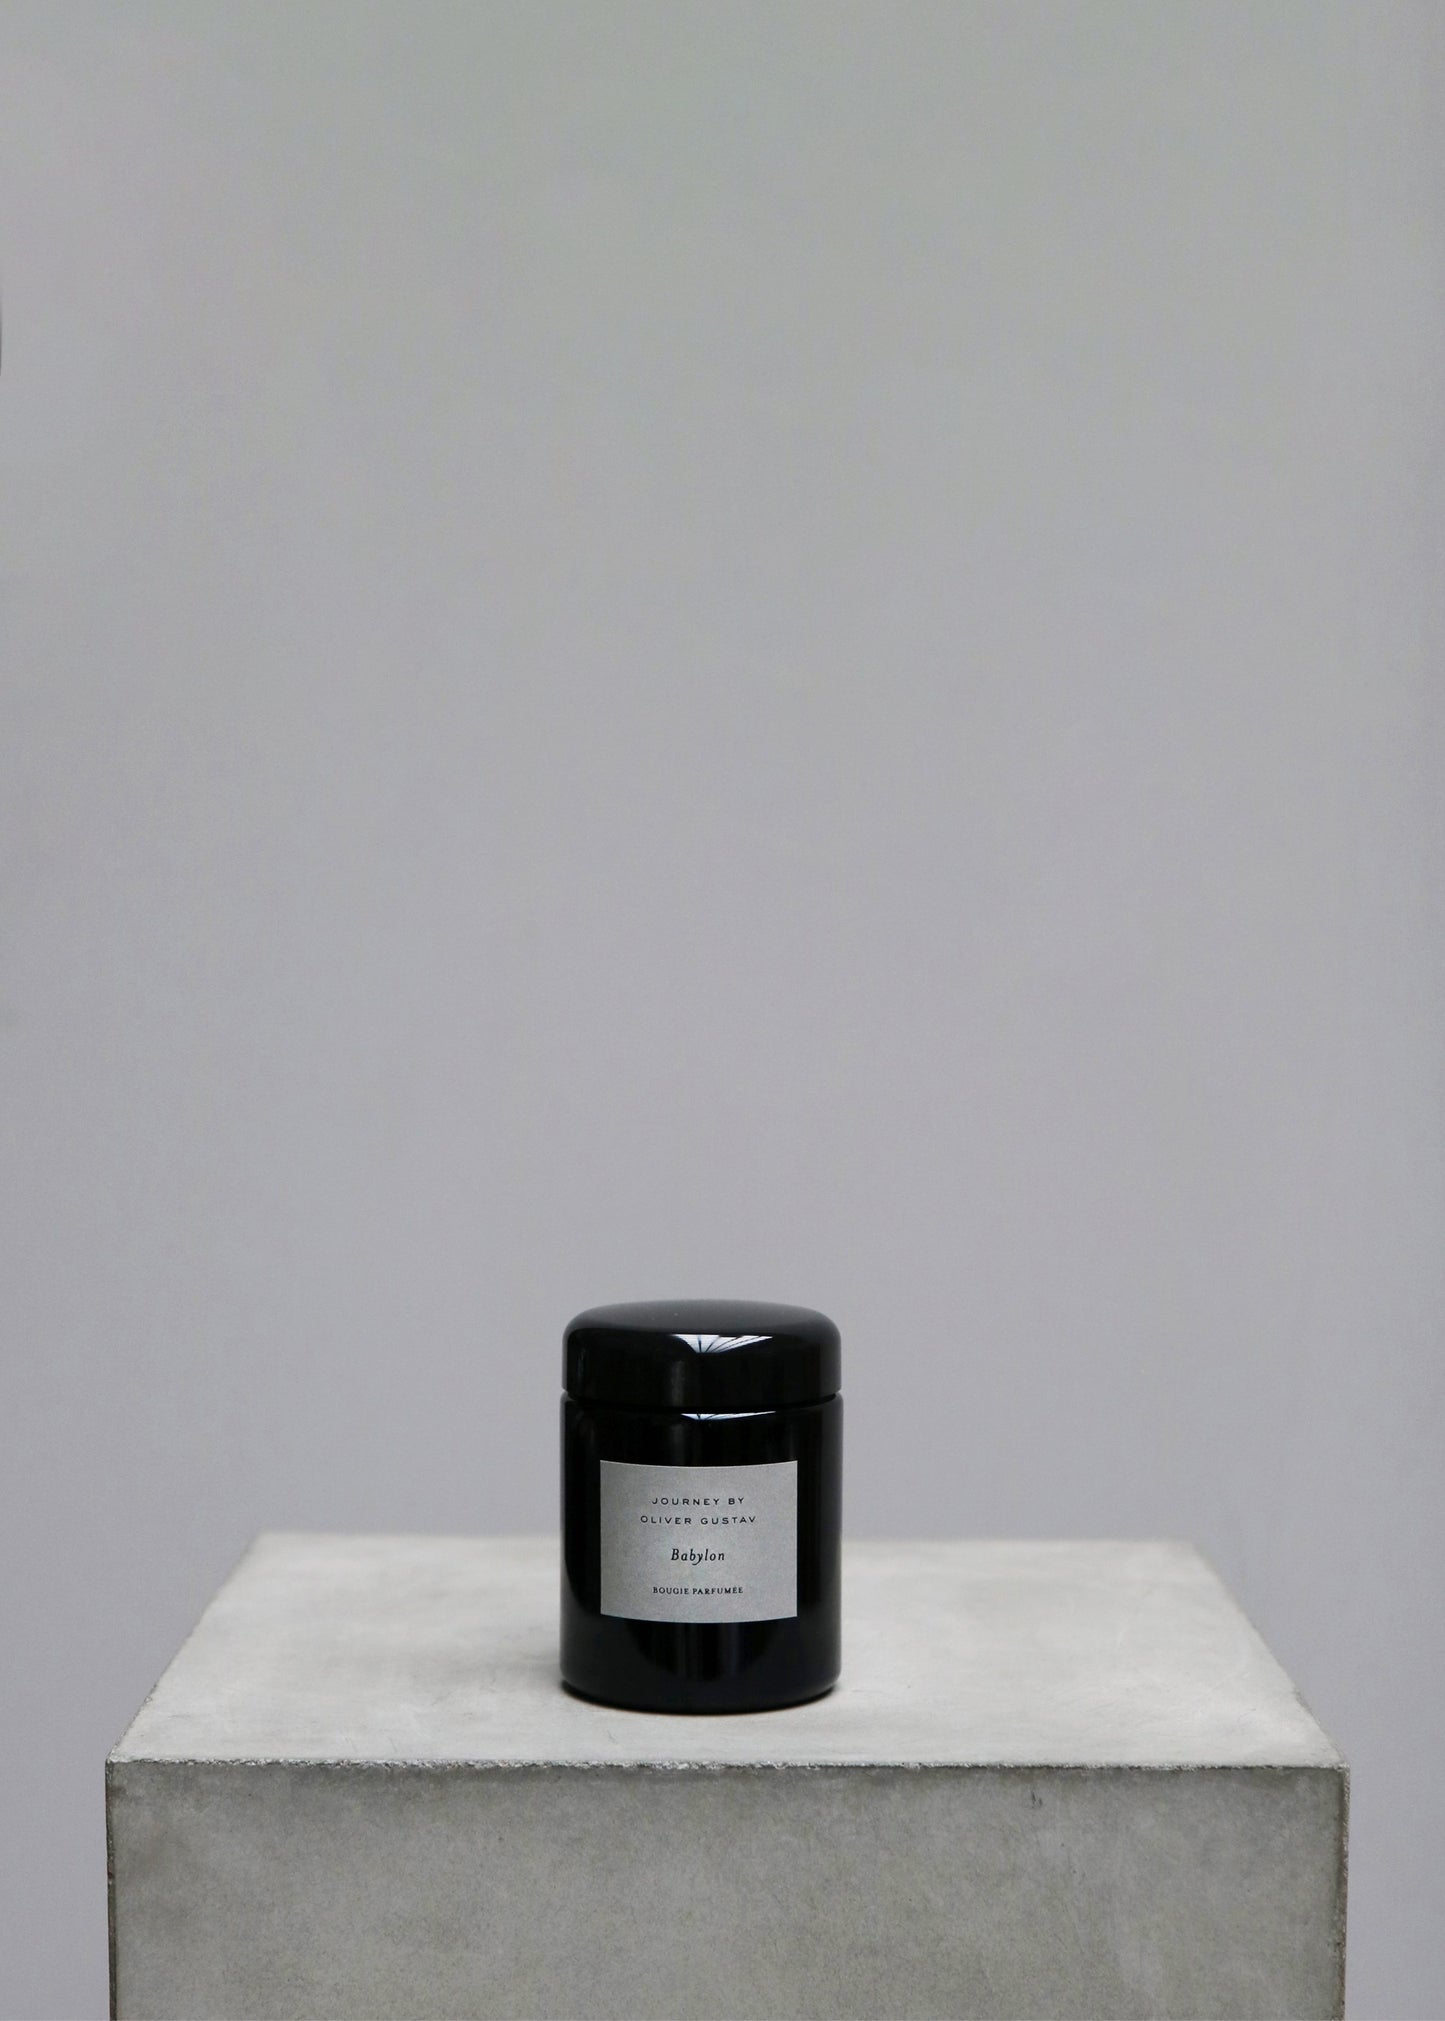 "Babylon" Scented Candle